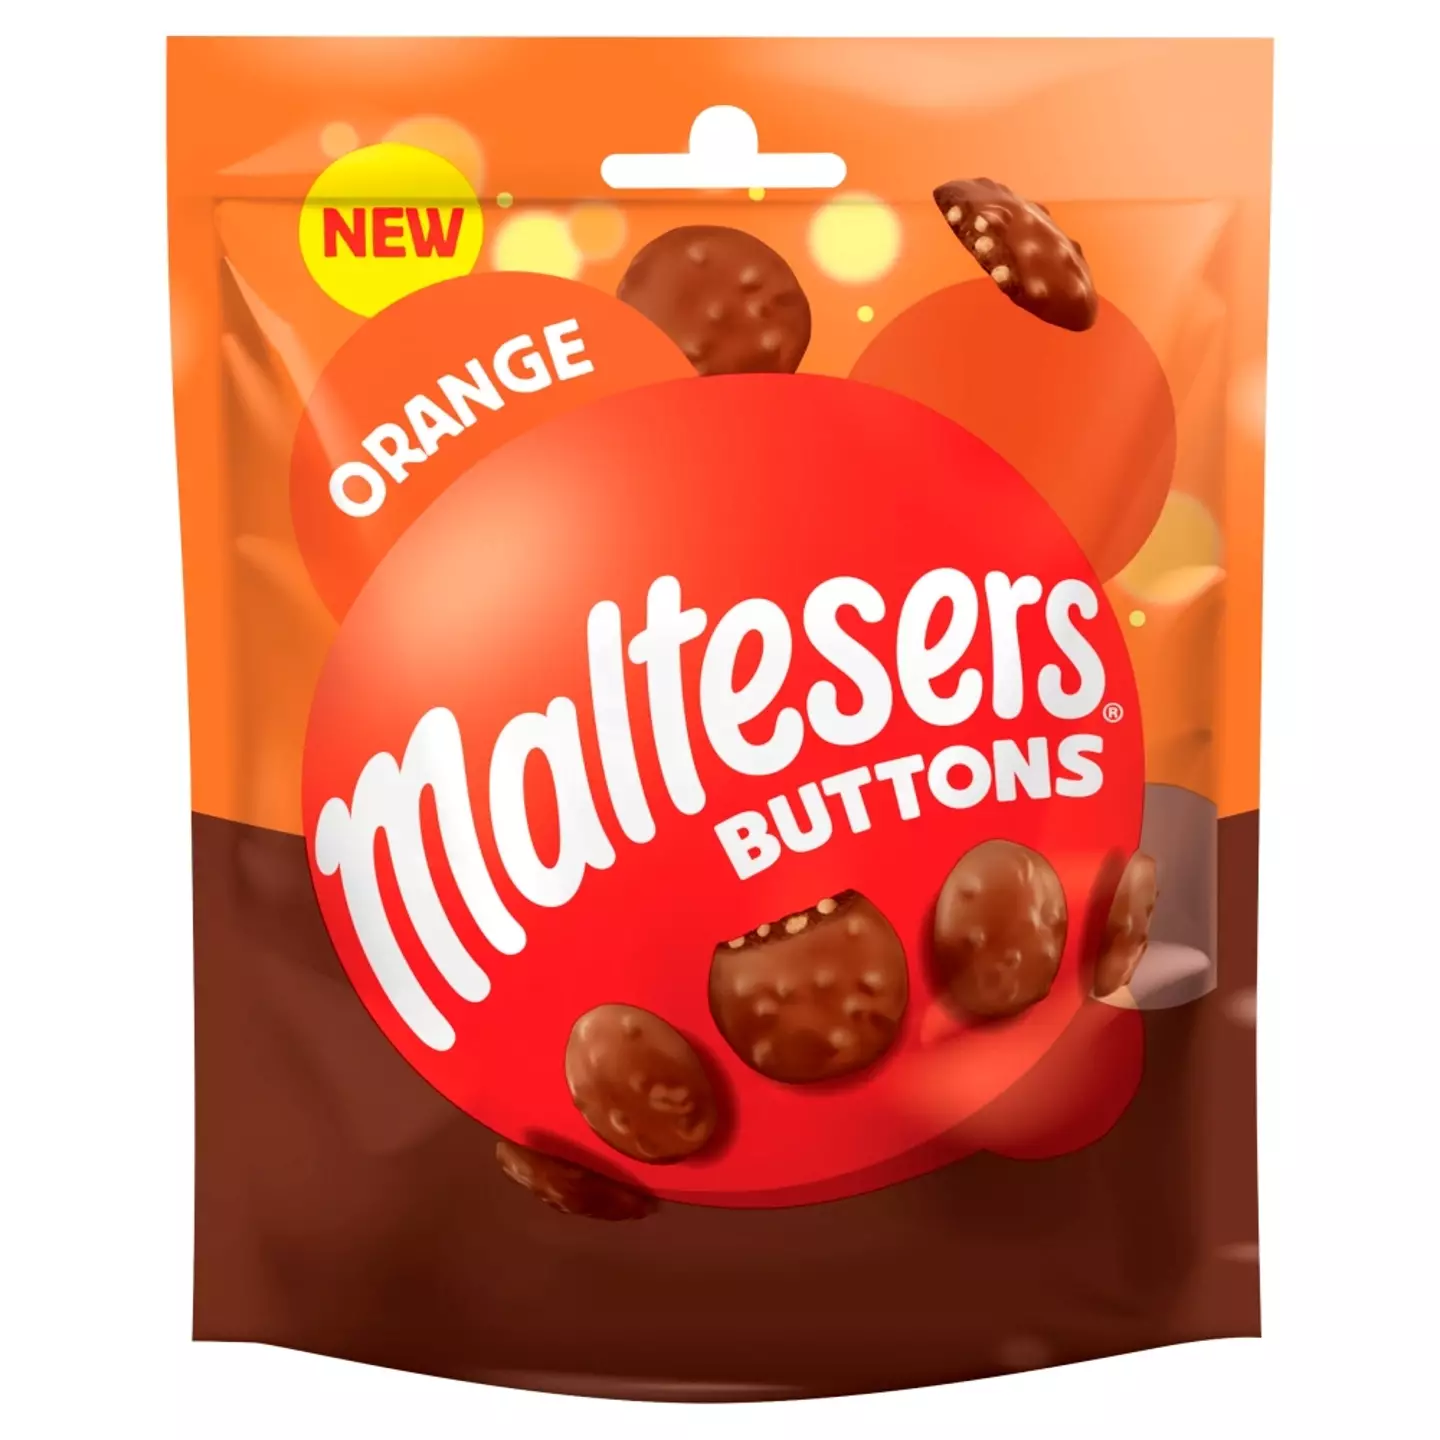 The orange flavour Maltesers buttons will be available in different packs (